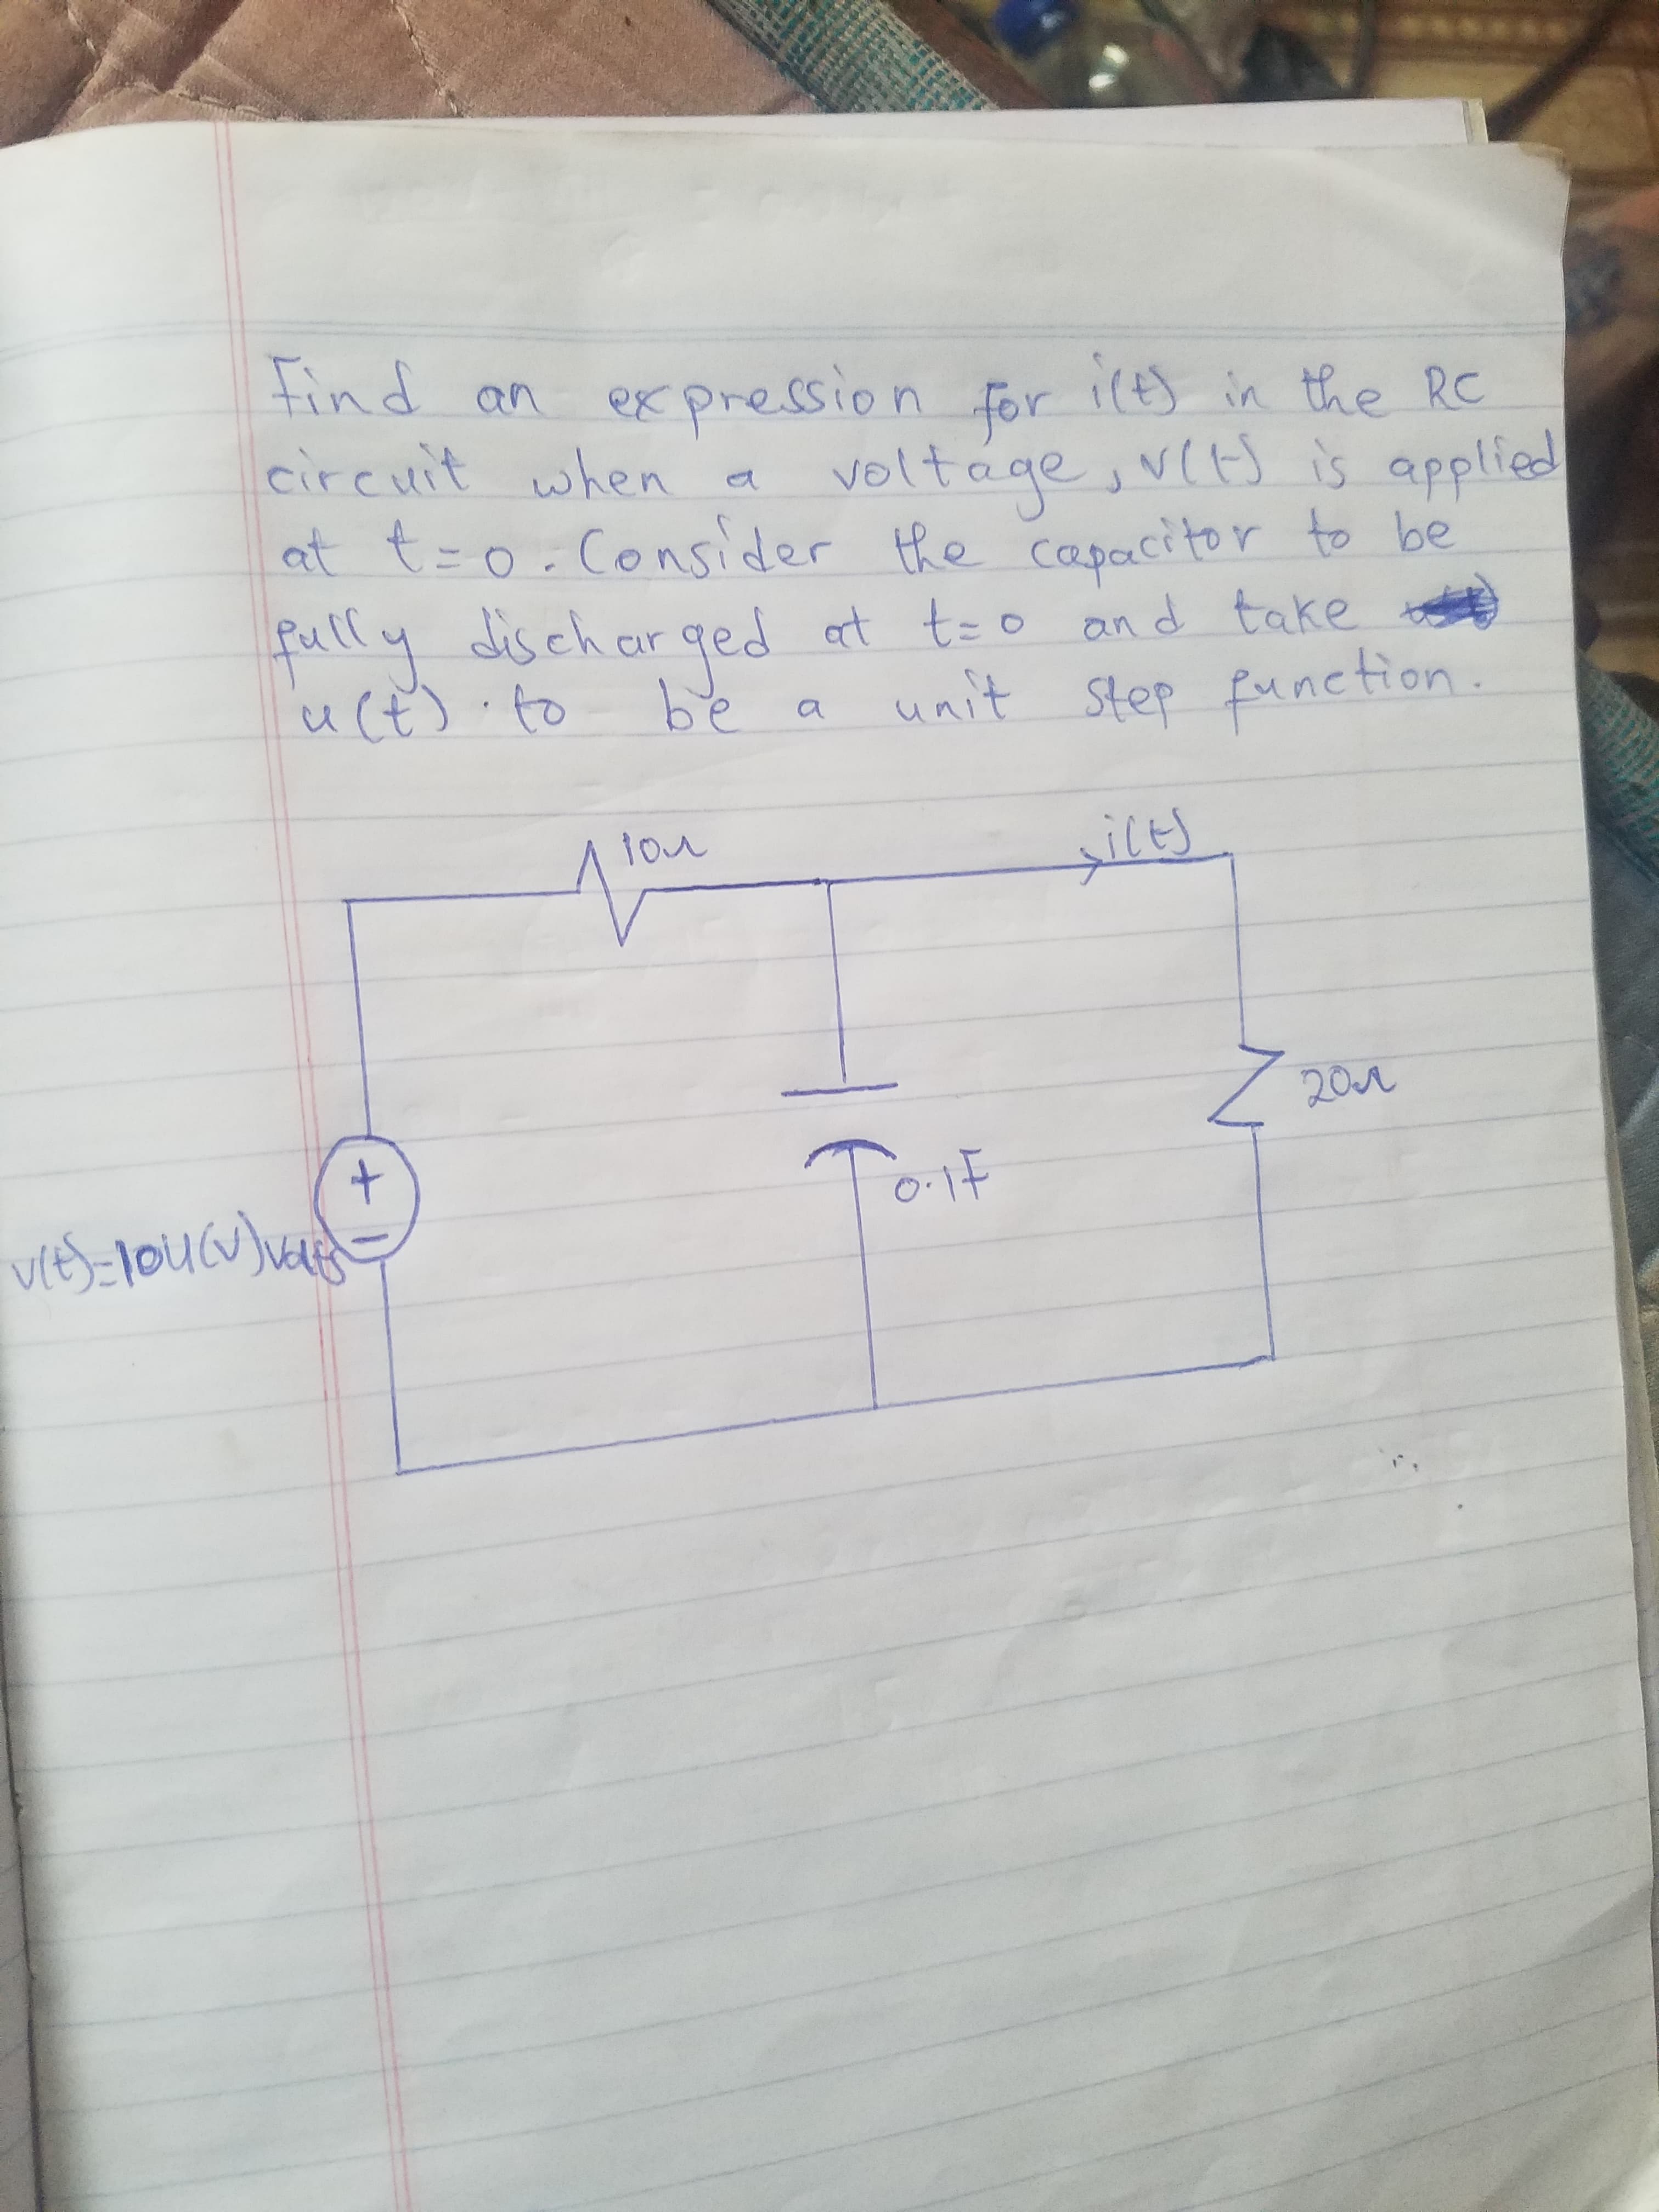 *******
an
o pind
circuit when
expression for i(t) in the RC
voltáge ,v(tS is applied
at t=0.Consider the capacitor to be
fully dischar
ged at t= o and take
unit Step function.
be
to
1ou
士
